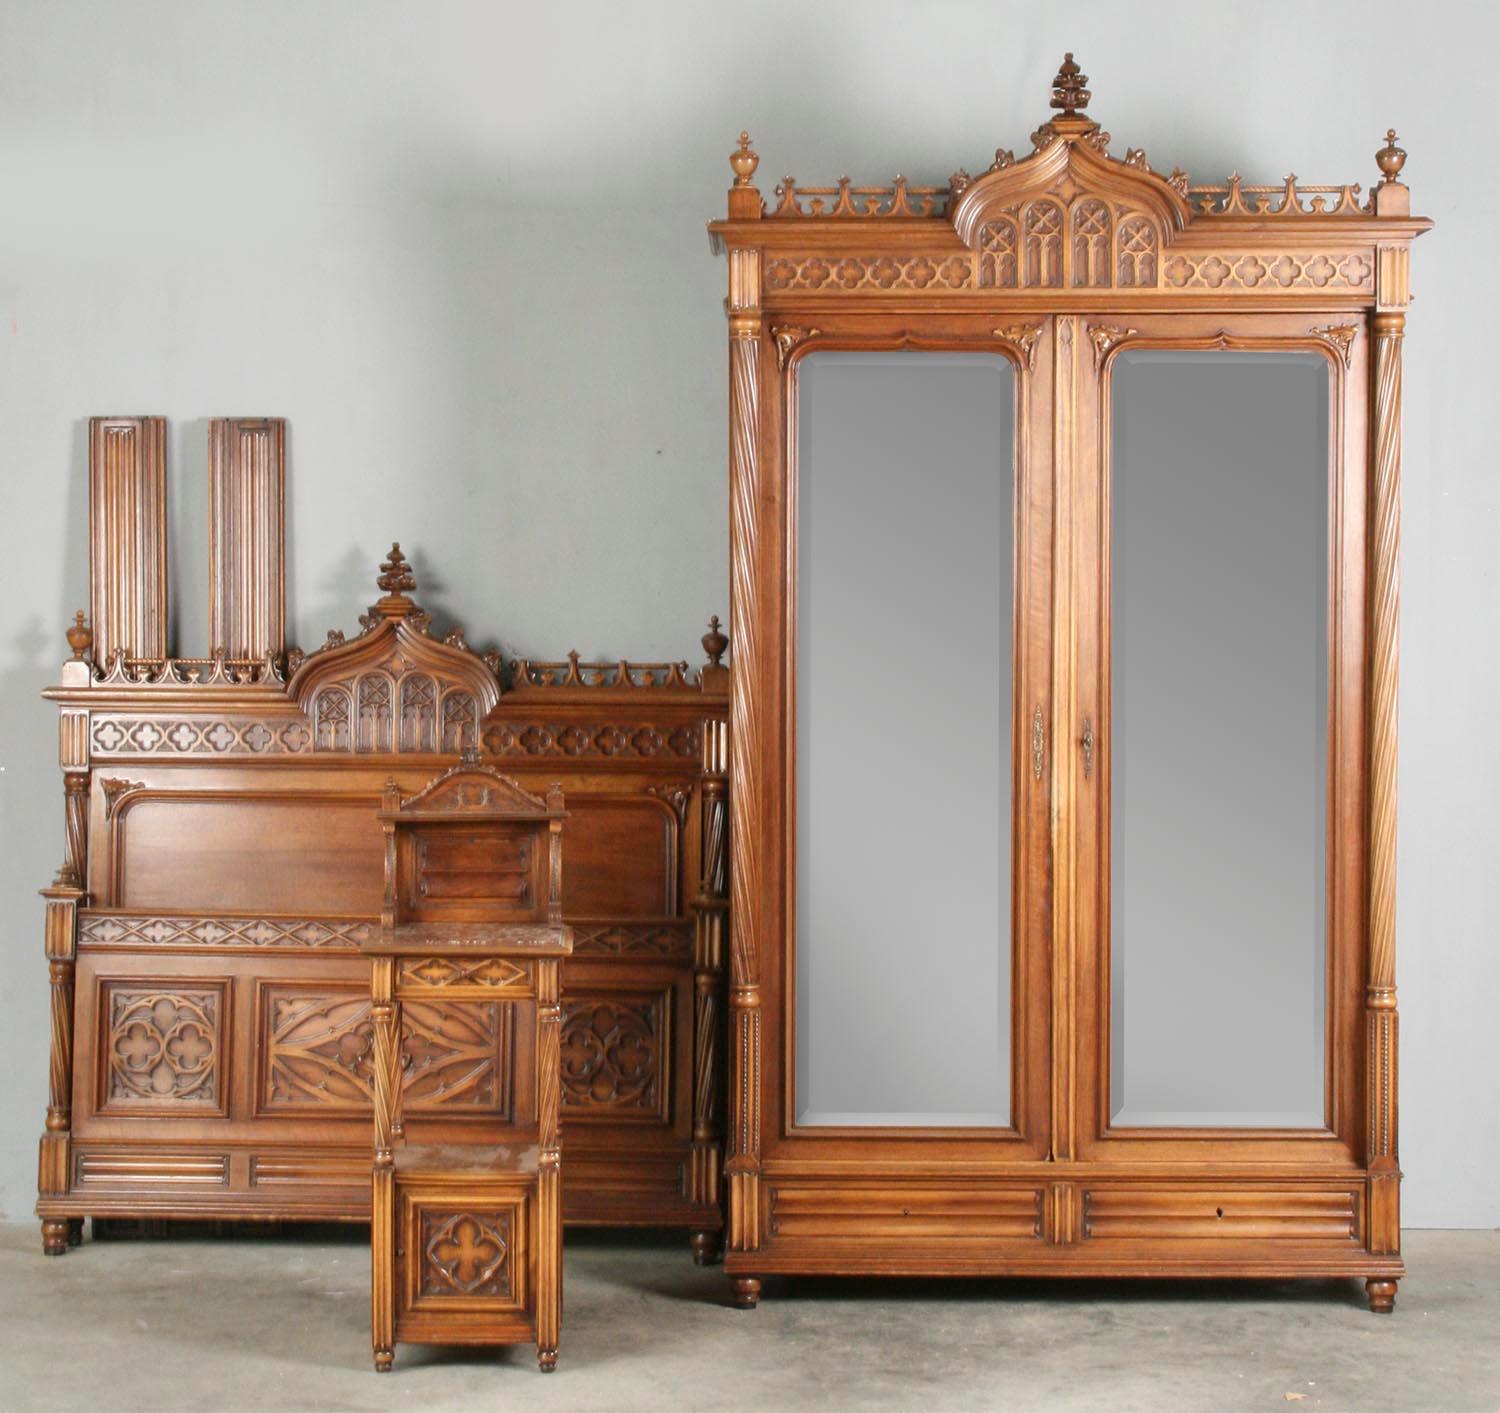 3-Piece bedroom set from France, carved walnut in Gothic style. 
The wardrobe cabinet has mirrors in the doors. 
Size of the wardrobe: 268 cm tall, 156 cm wide and 55 cm deep. 
The top of the wardrobe has a few pieces missing on right, see picture